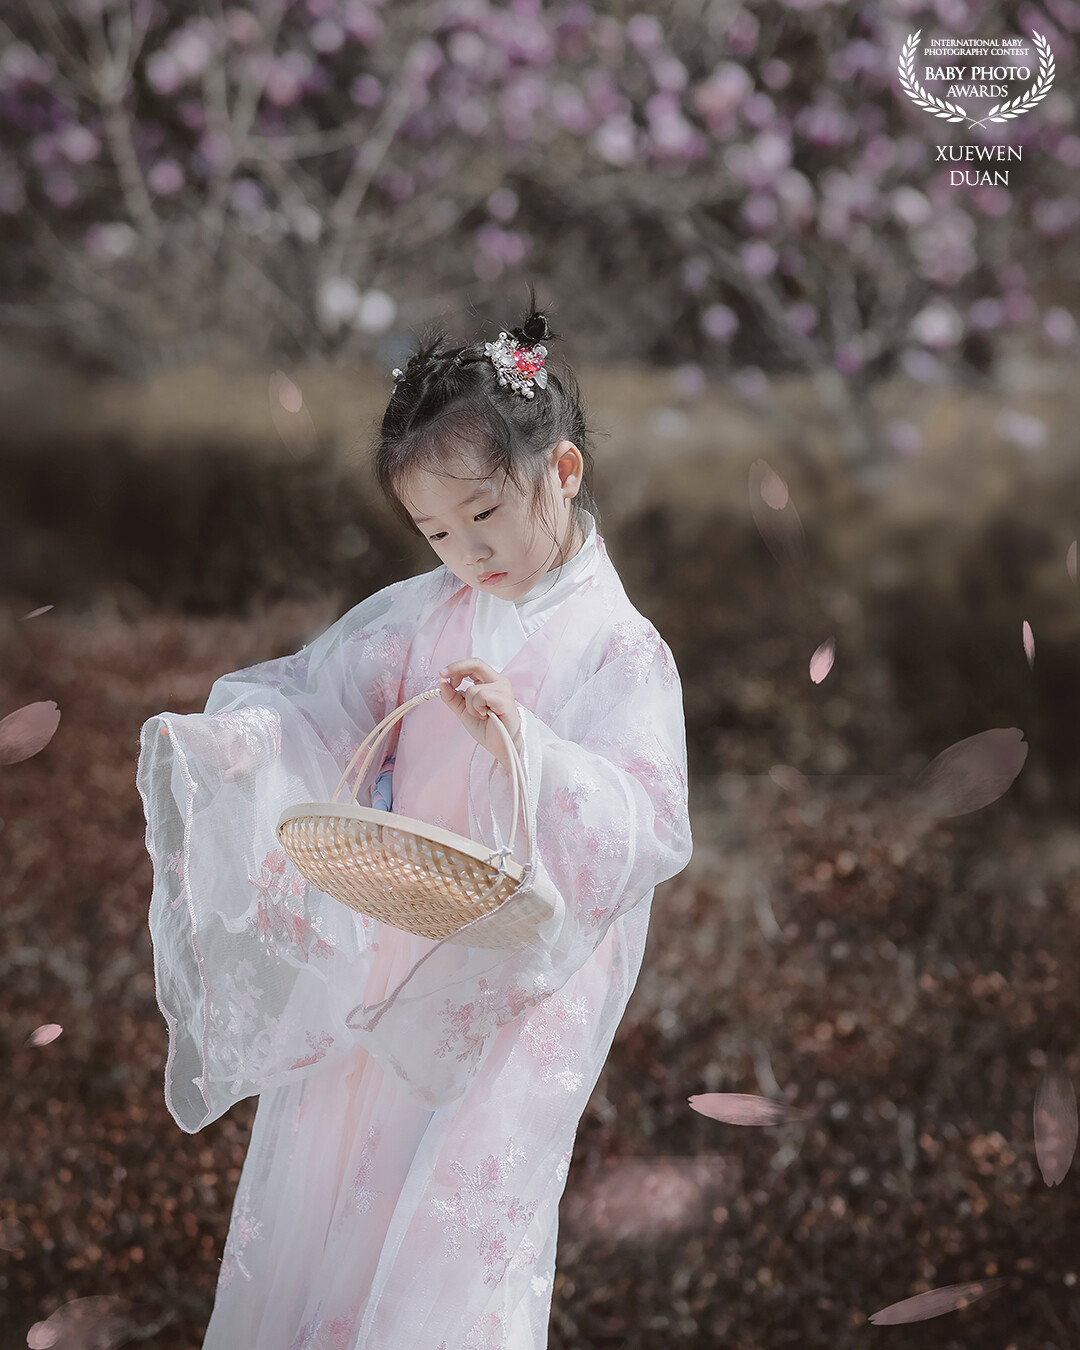 At the moment when the cherry blossoms were falling, the cute little stood under the tree. She turned back and looked like thinking about something. At that moment, she was beautiful!